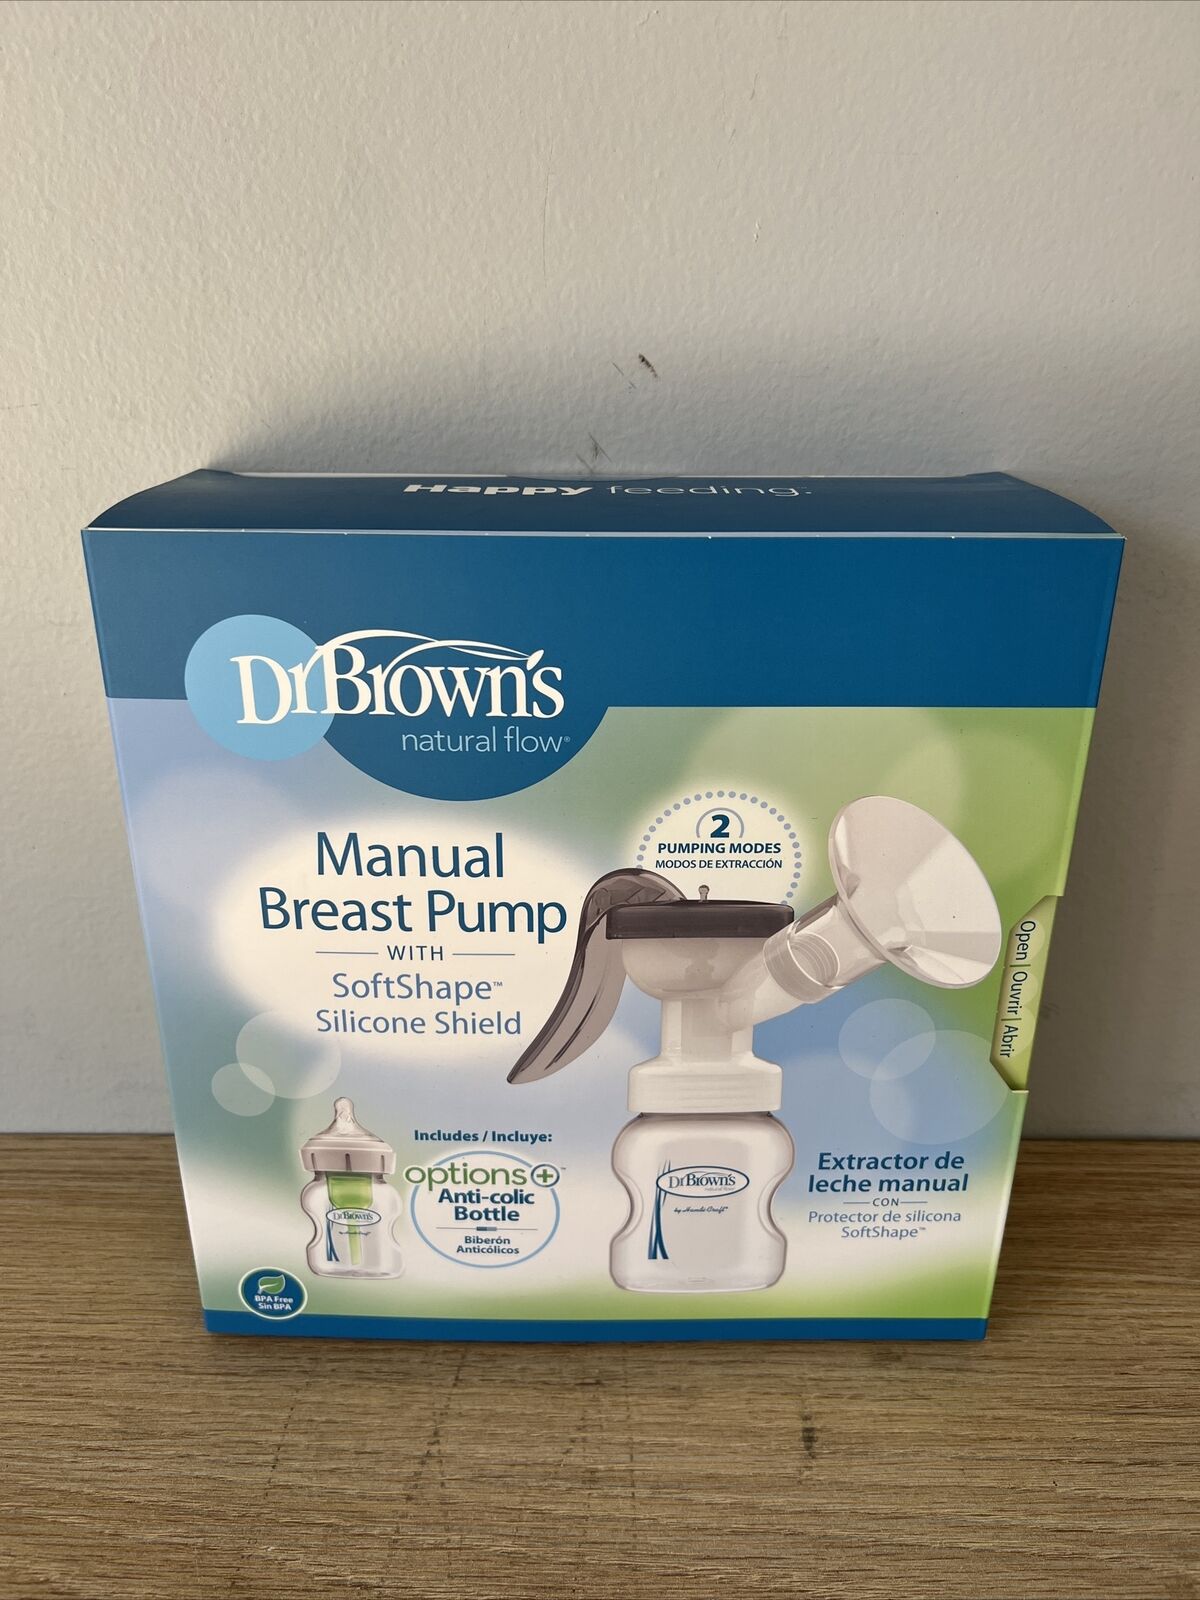 Dr Browns Bf102 Manual Breast Pump With Soft Shape Silicone Shield